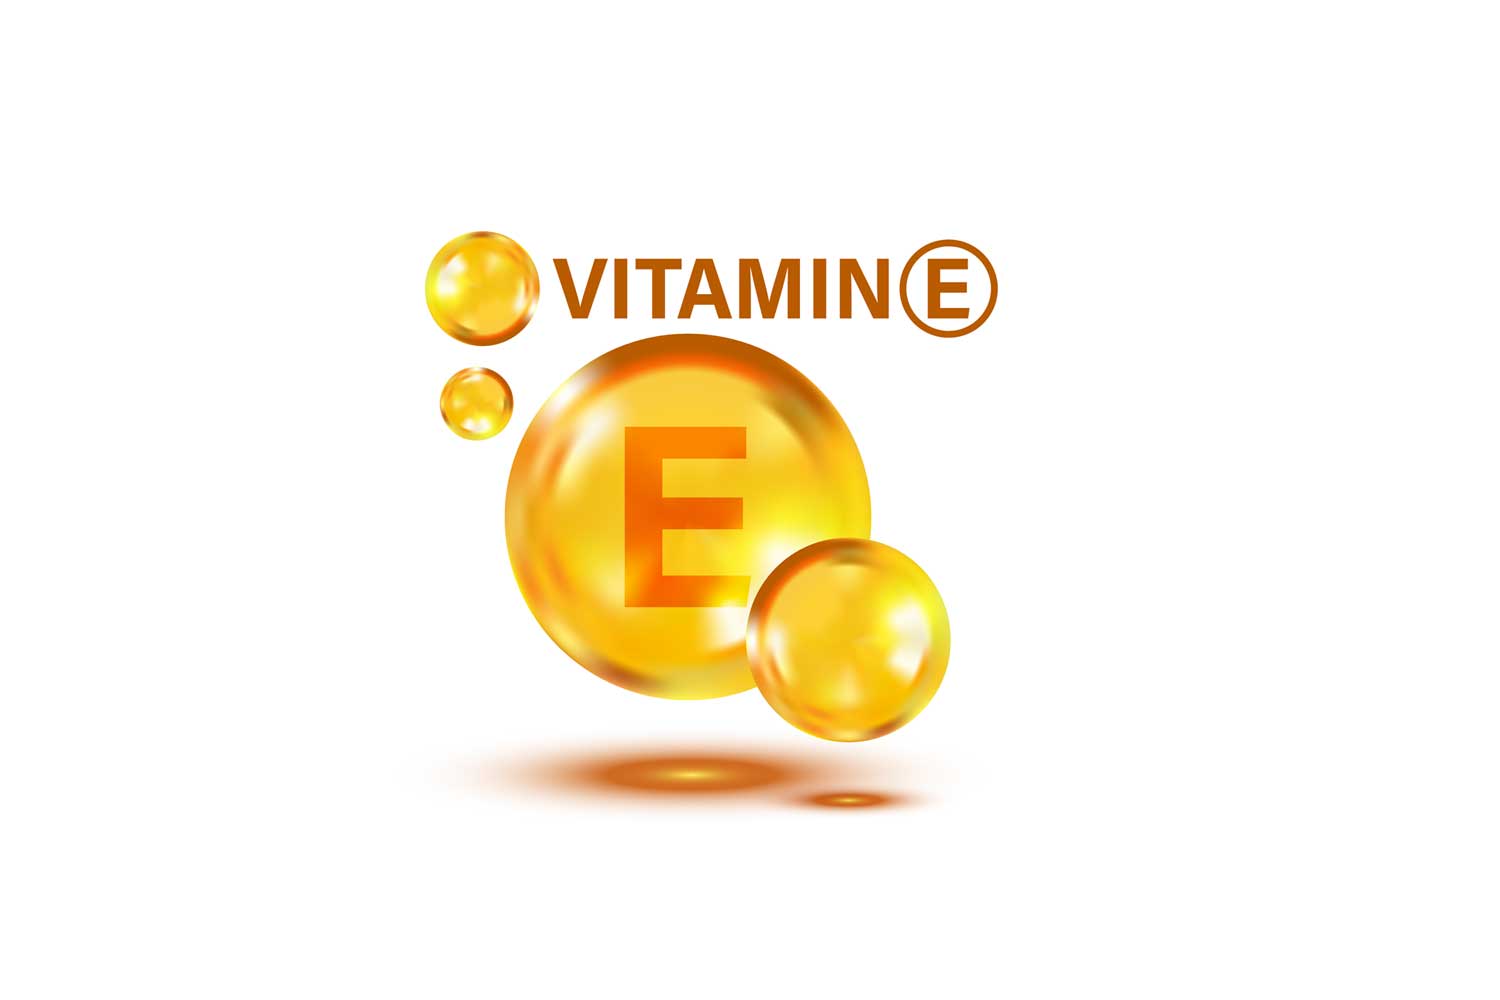 Stay Exceptionally Healthy with Vitamin E